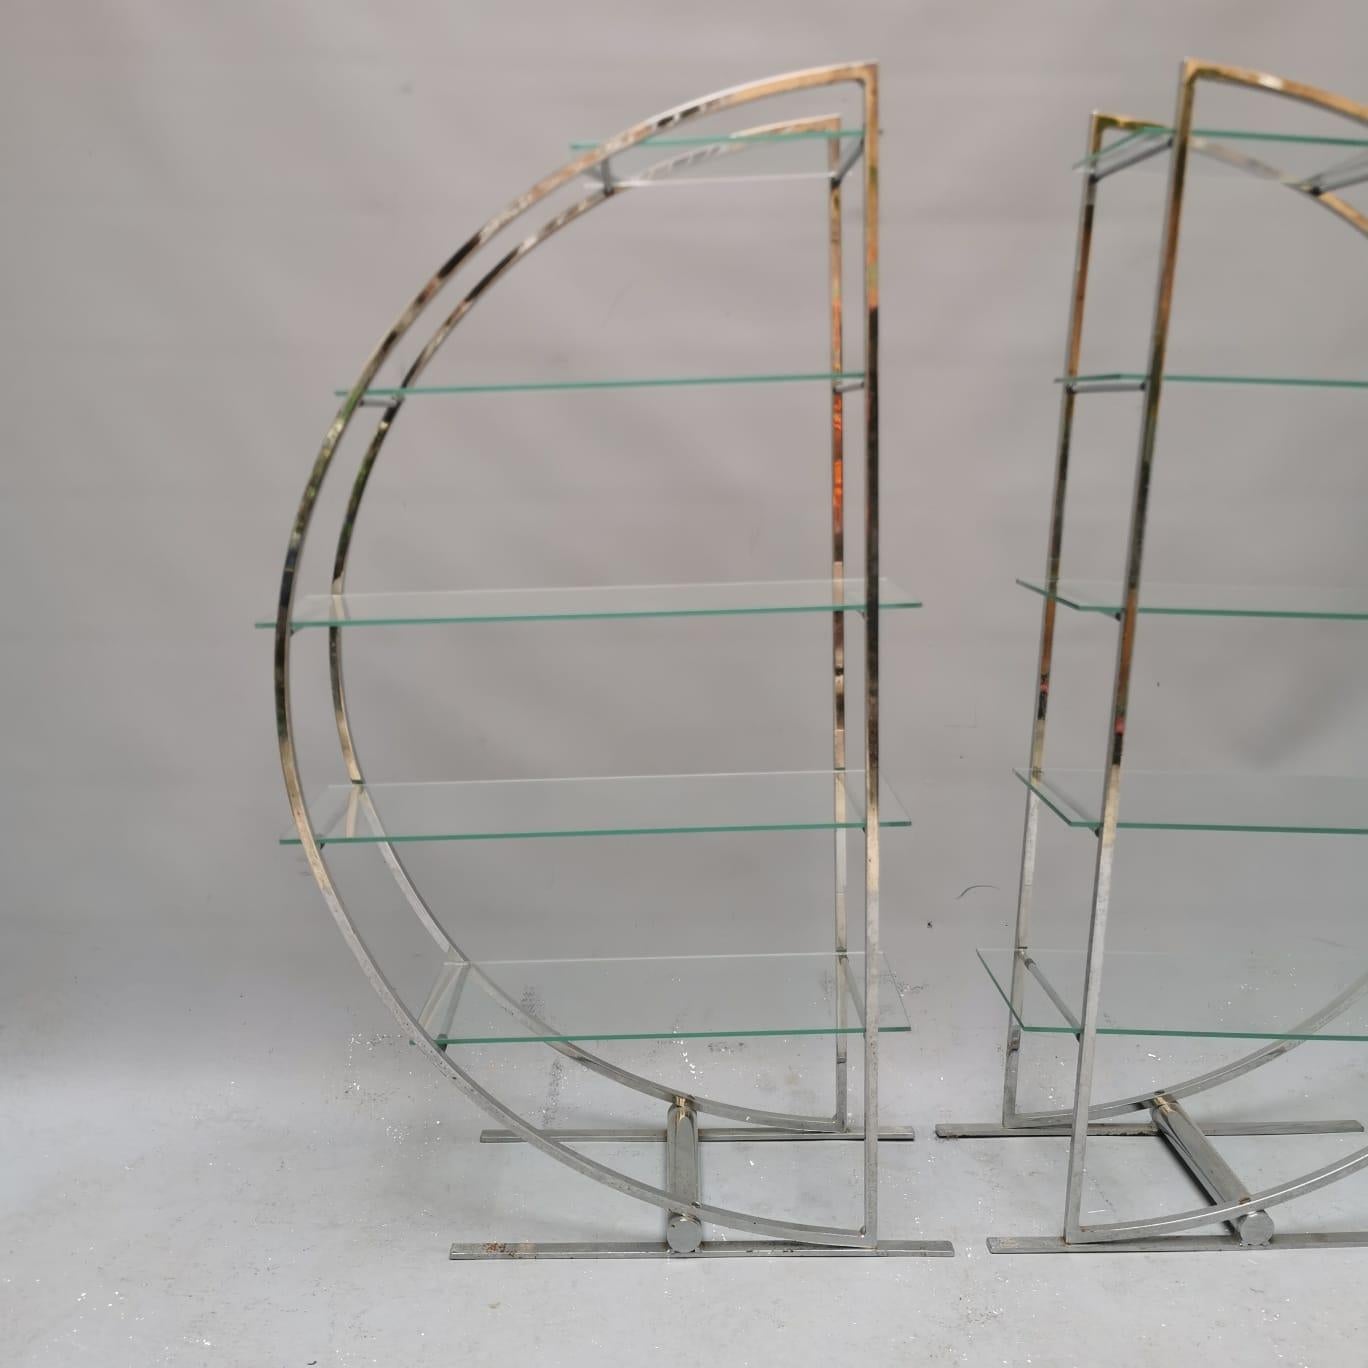 A pair of steel and glass bookcases with a very distinctive design. With inspiration from 1930s functionalist aesthetics this object is supposed to come out of the 60s or 70s. Perfect for those who like a rigorous, minimalist style but at the same